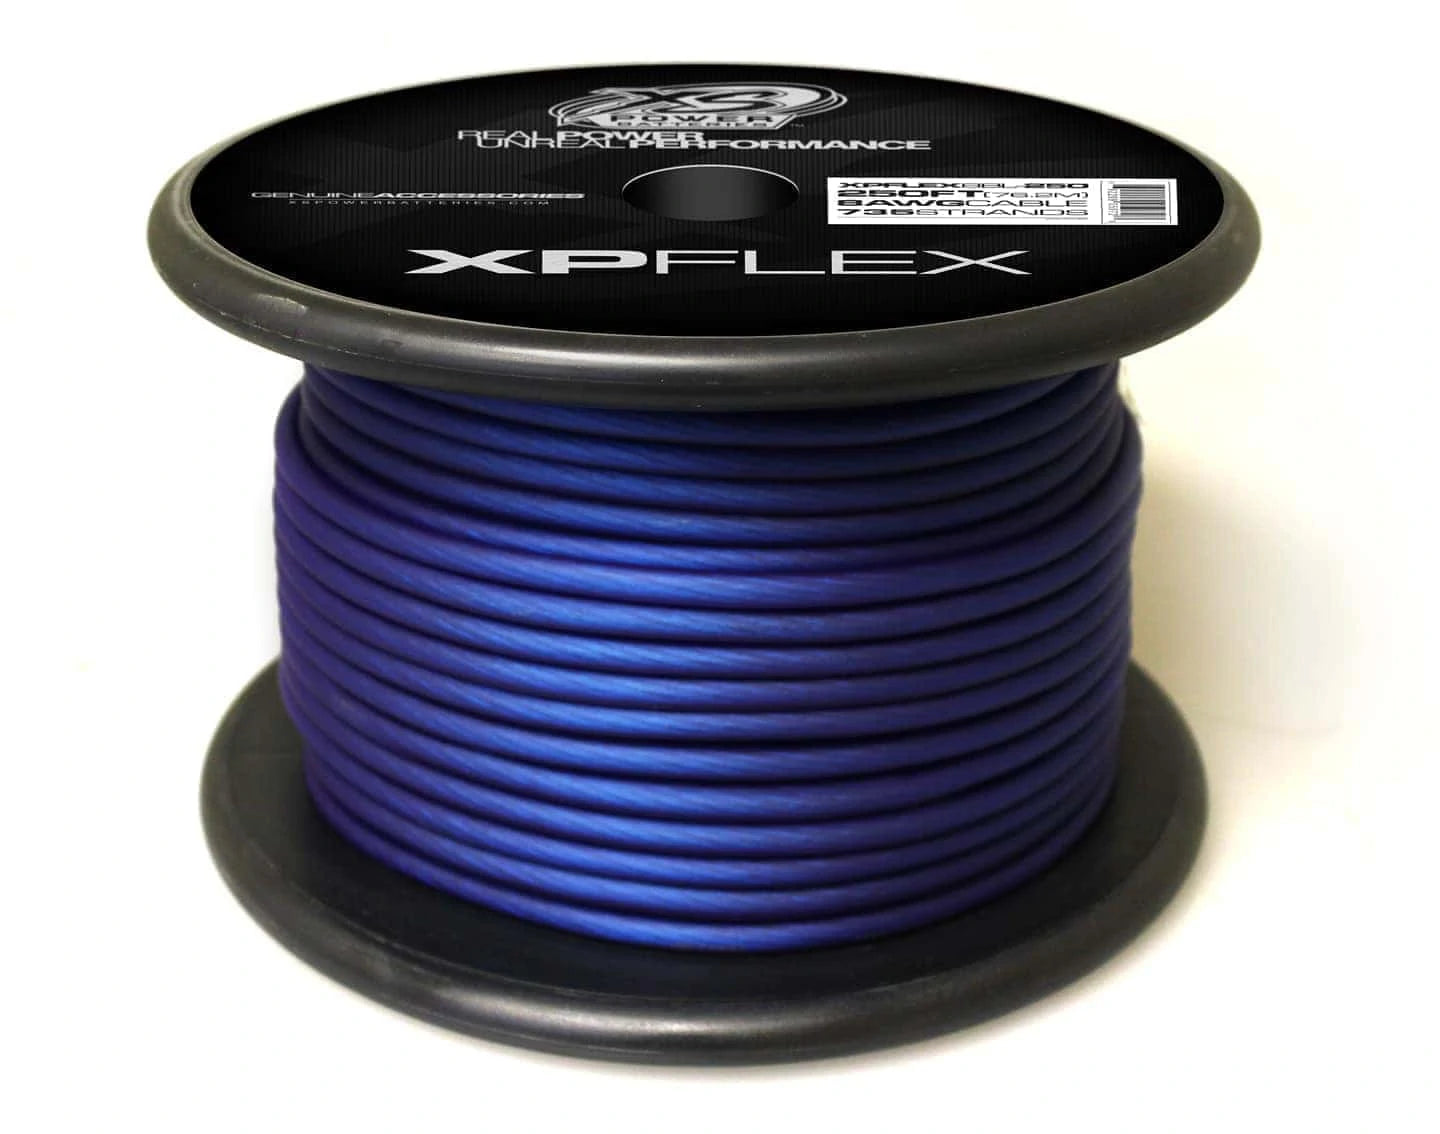 XS Power 8 AWG Gauge XP Flex Car Audio Power and Ground Cable 250ft spool